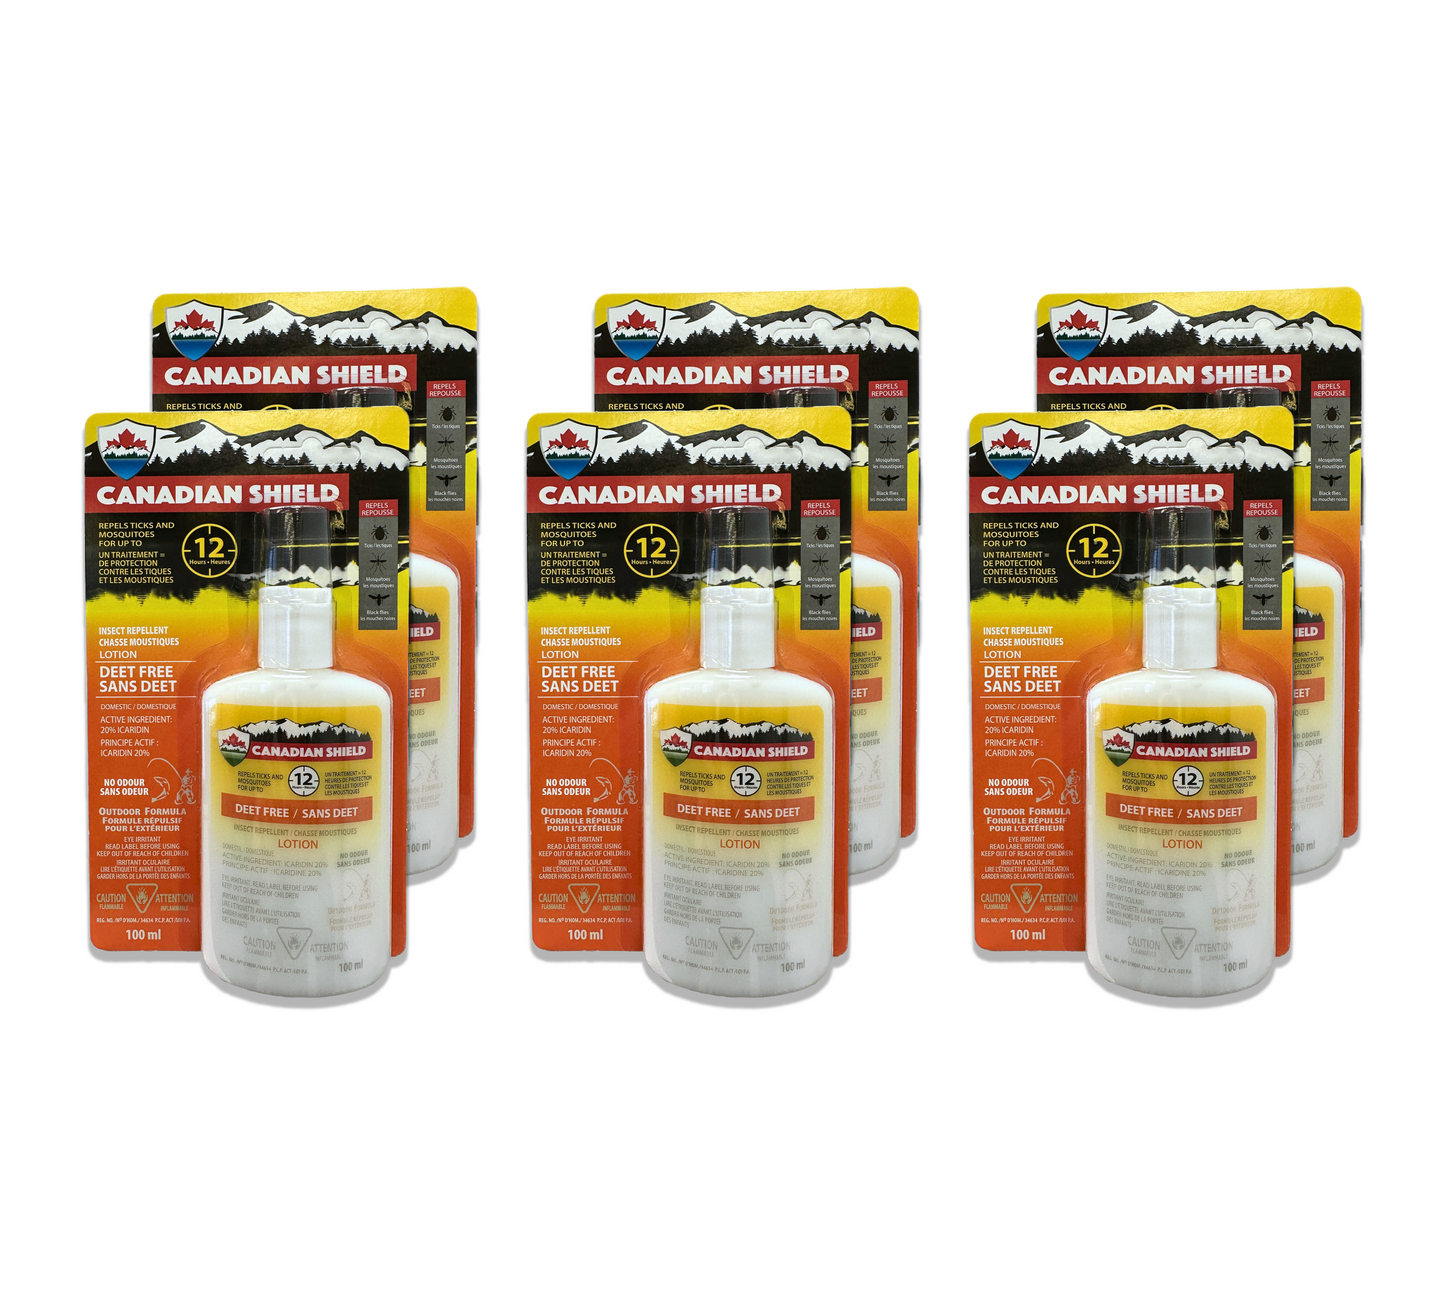 Canadian Shield 20% Icaridin Insect Repellent Lotion [100ML]